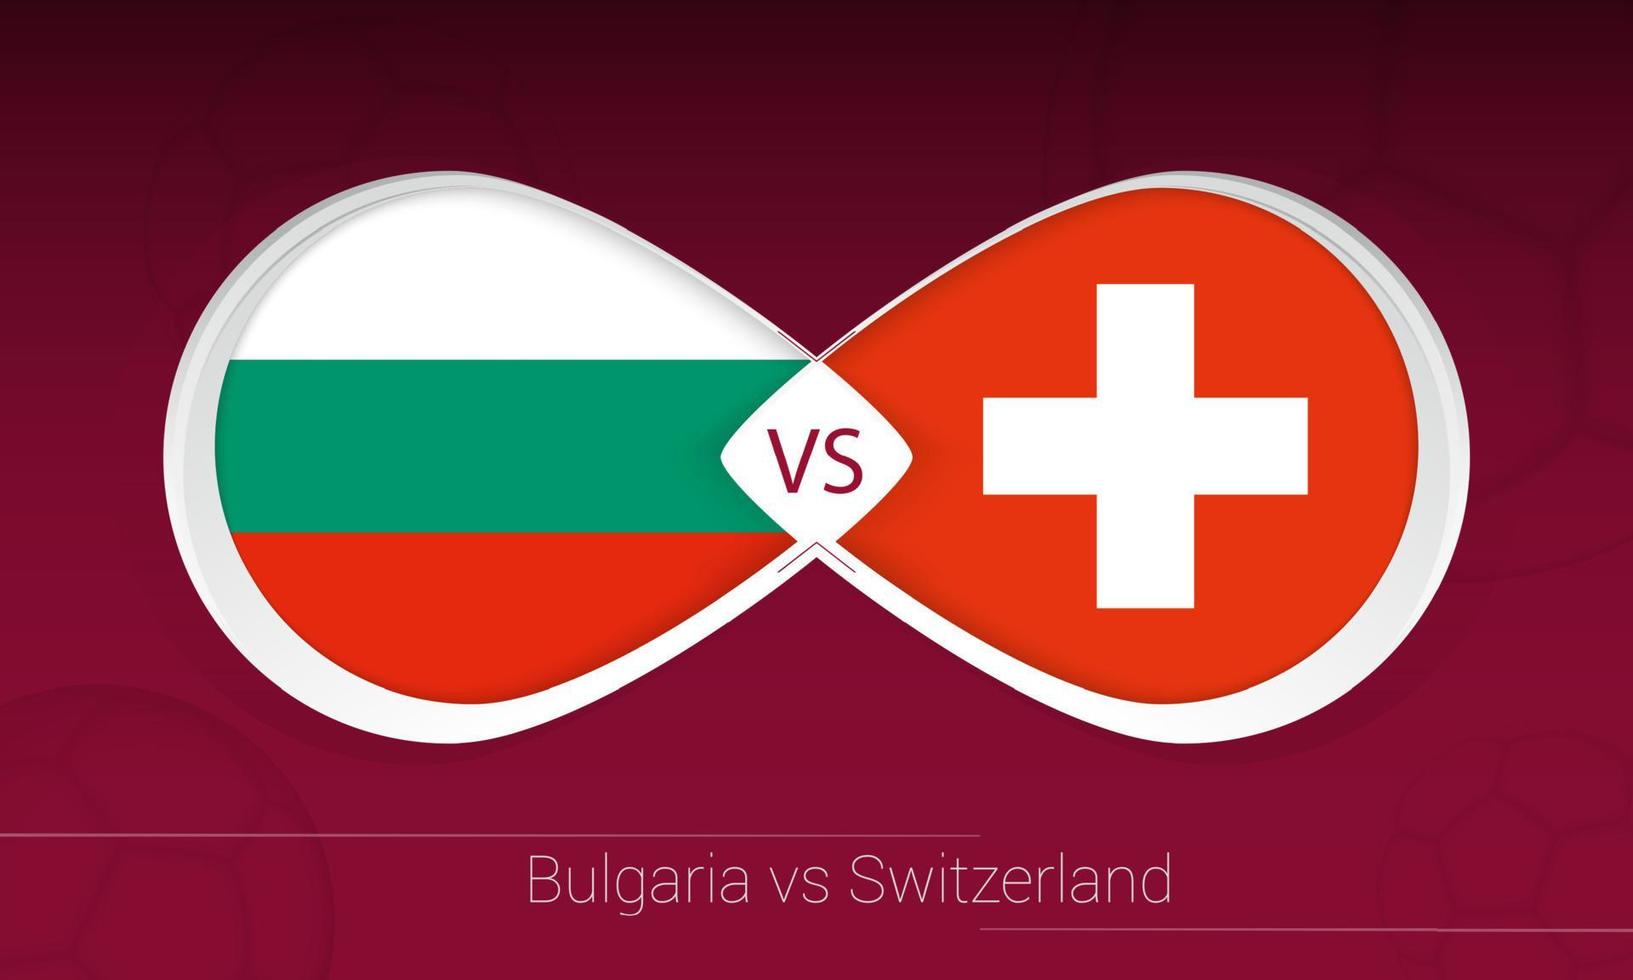 Bulgaria vs Switzerland in Football Competition, Group C. Versus icon on Football background. vector